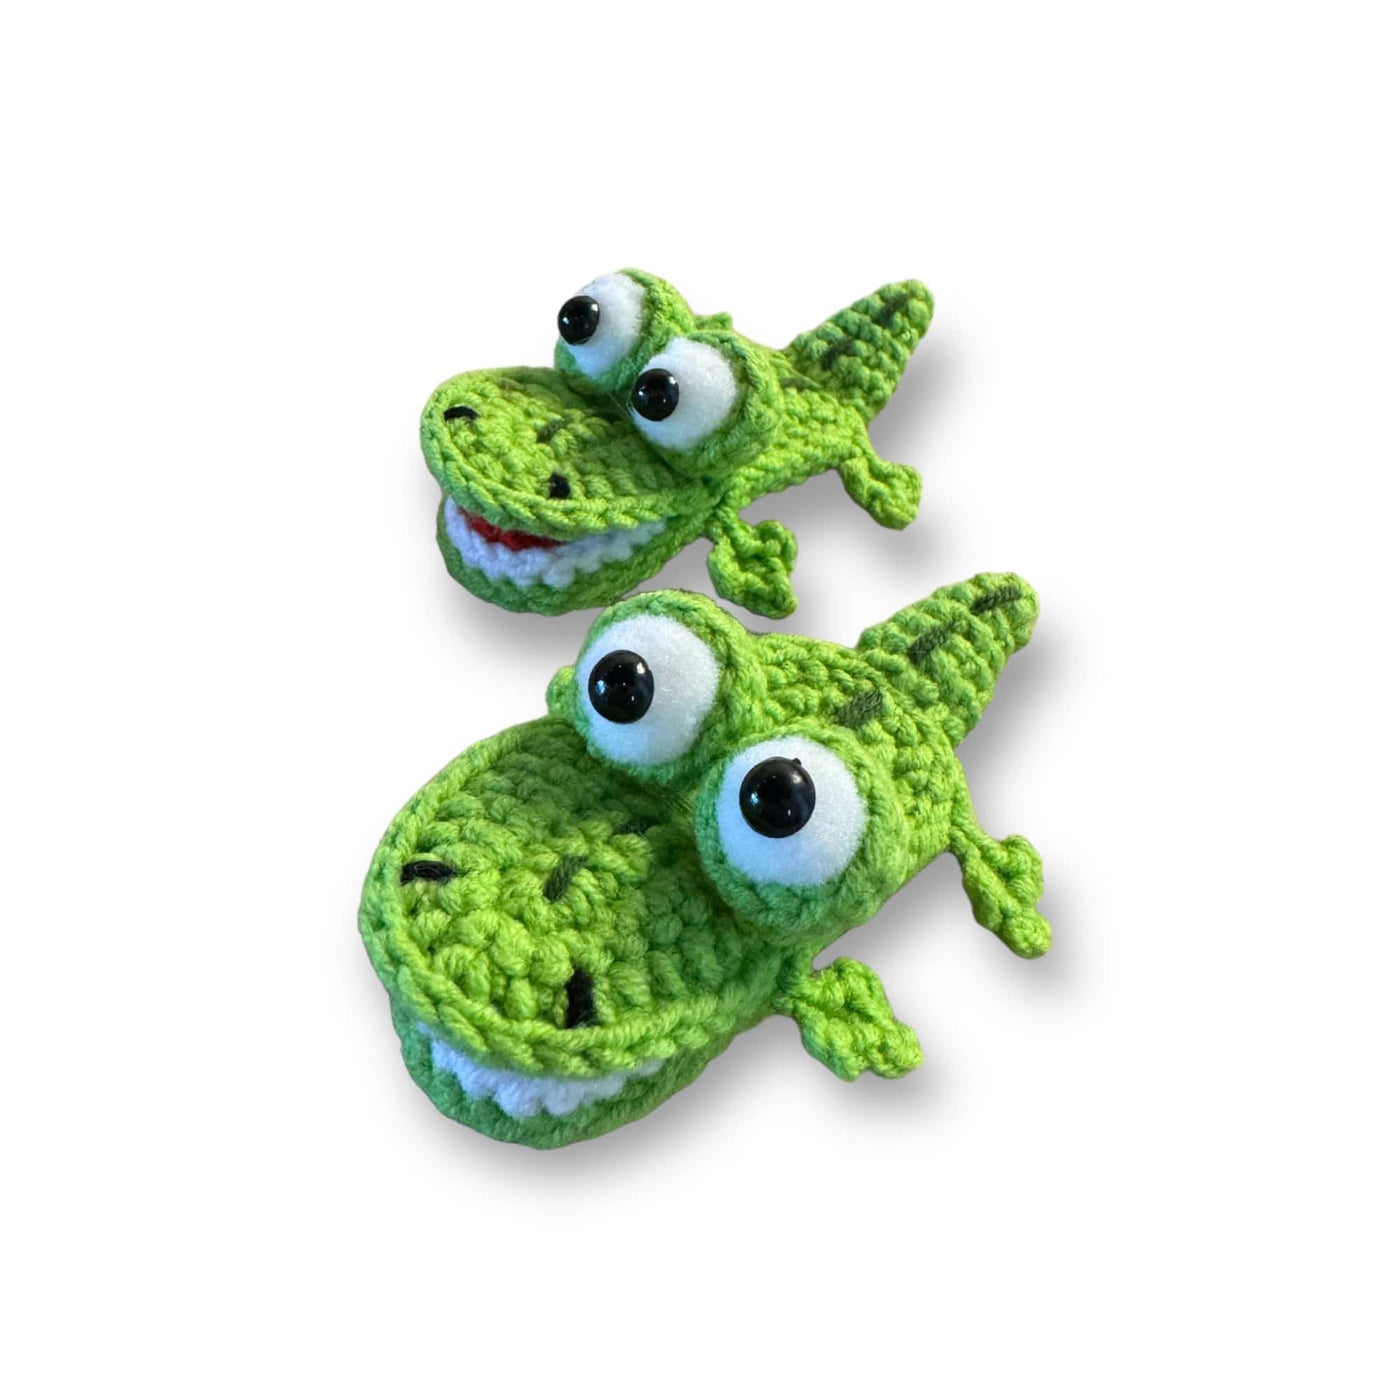 Best Day Ever Kids Hair Clips Hand Crocheted Alligator Hair Clip Set - Green buy online boutique kids clothing